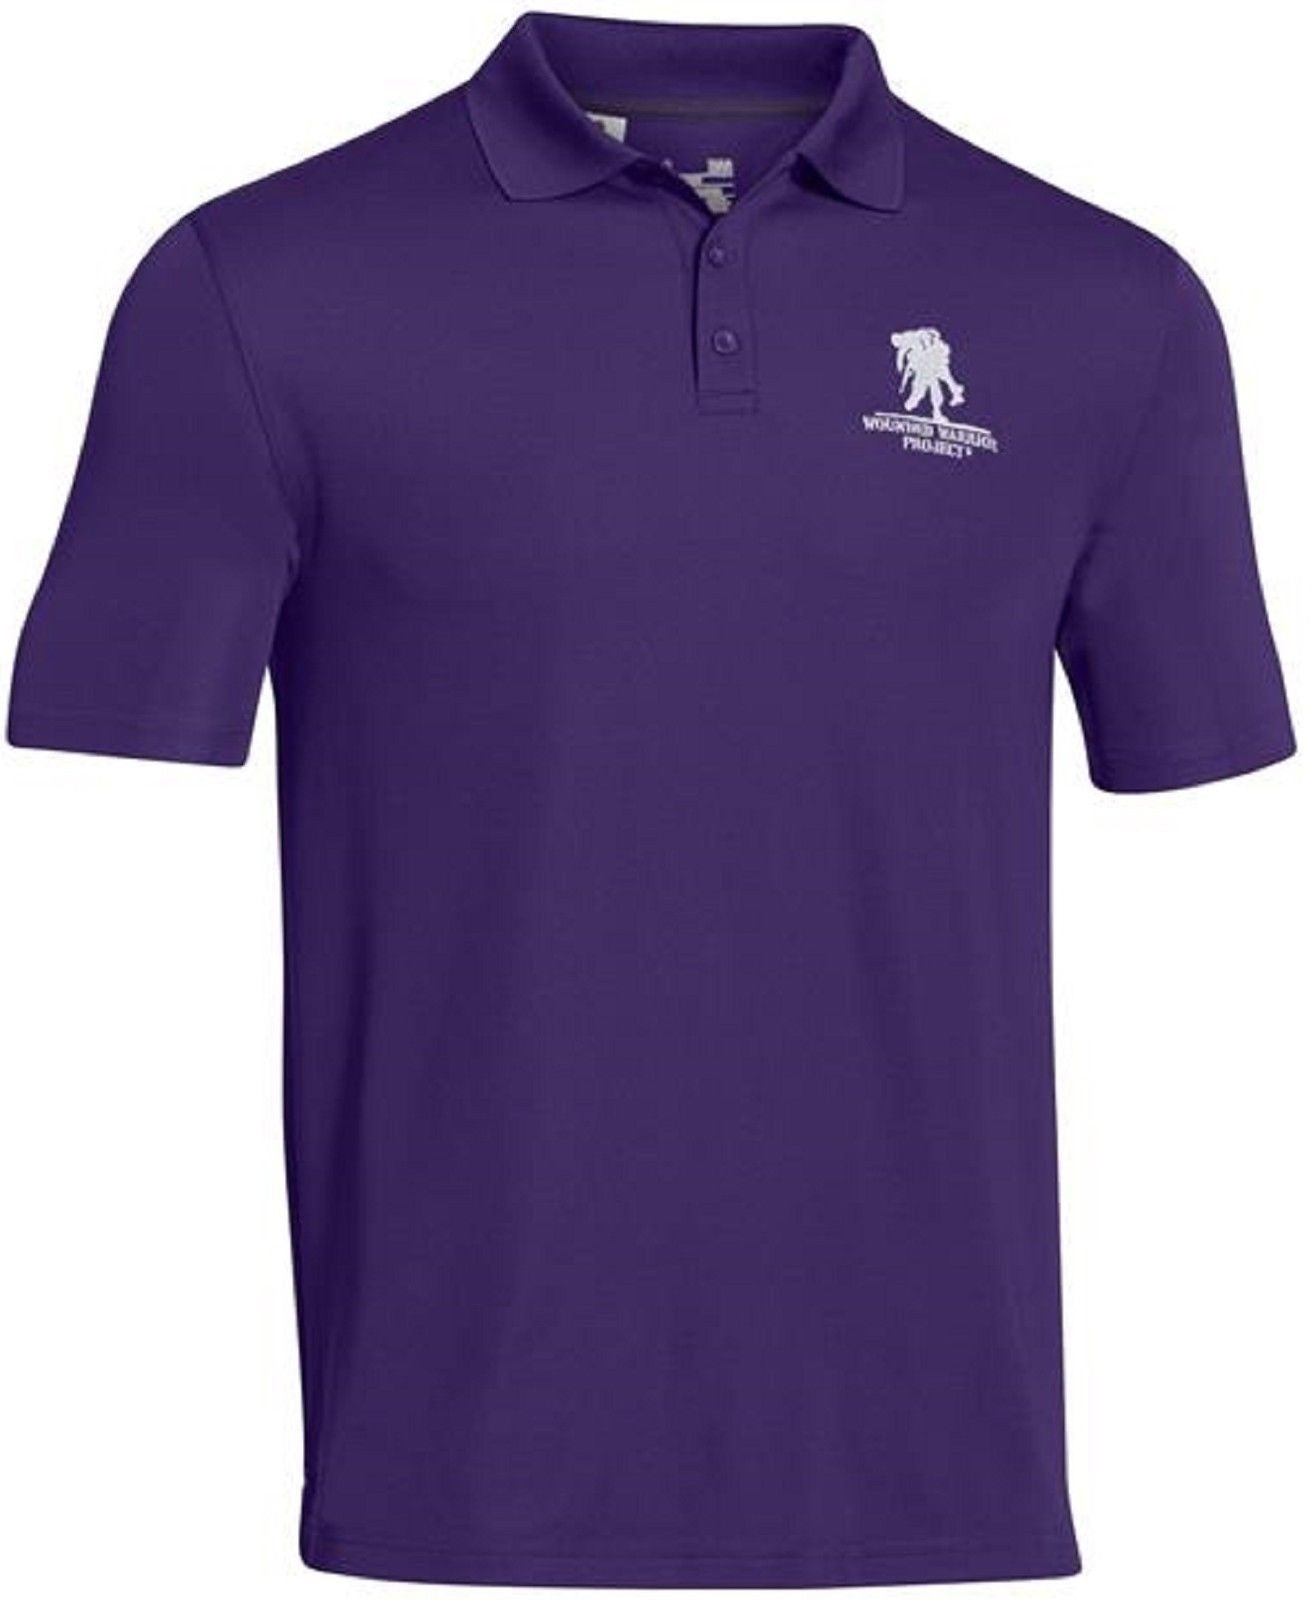 Under Armour Performance Polo Shirt Wounded Warrior Project Collared G ...